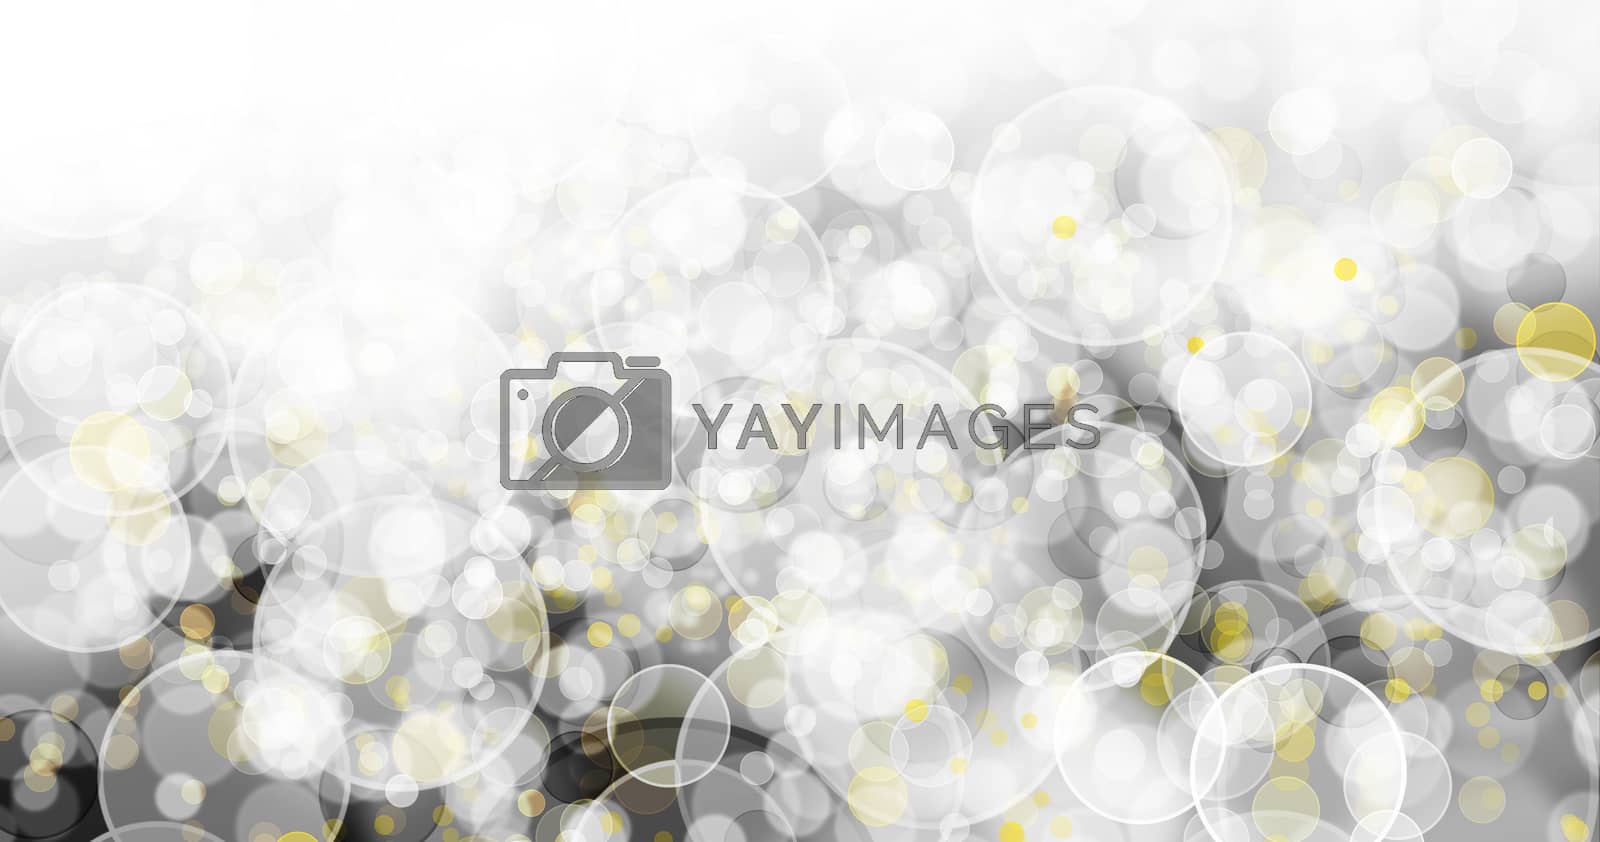 Royalty free image of The background has white bubbles to look bright. by thitimontoyai